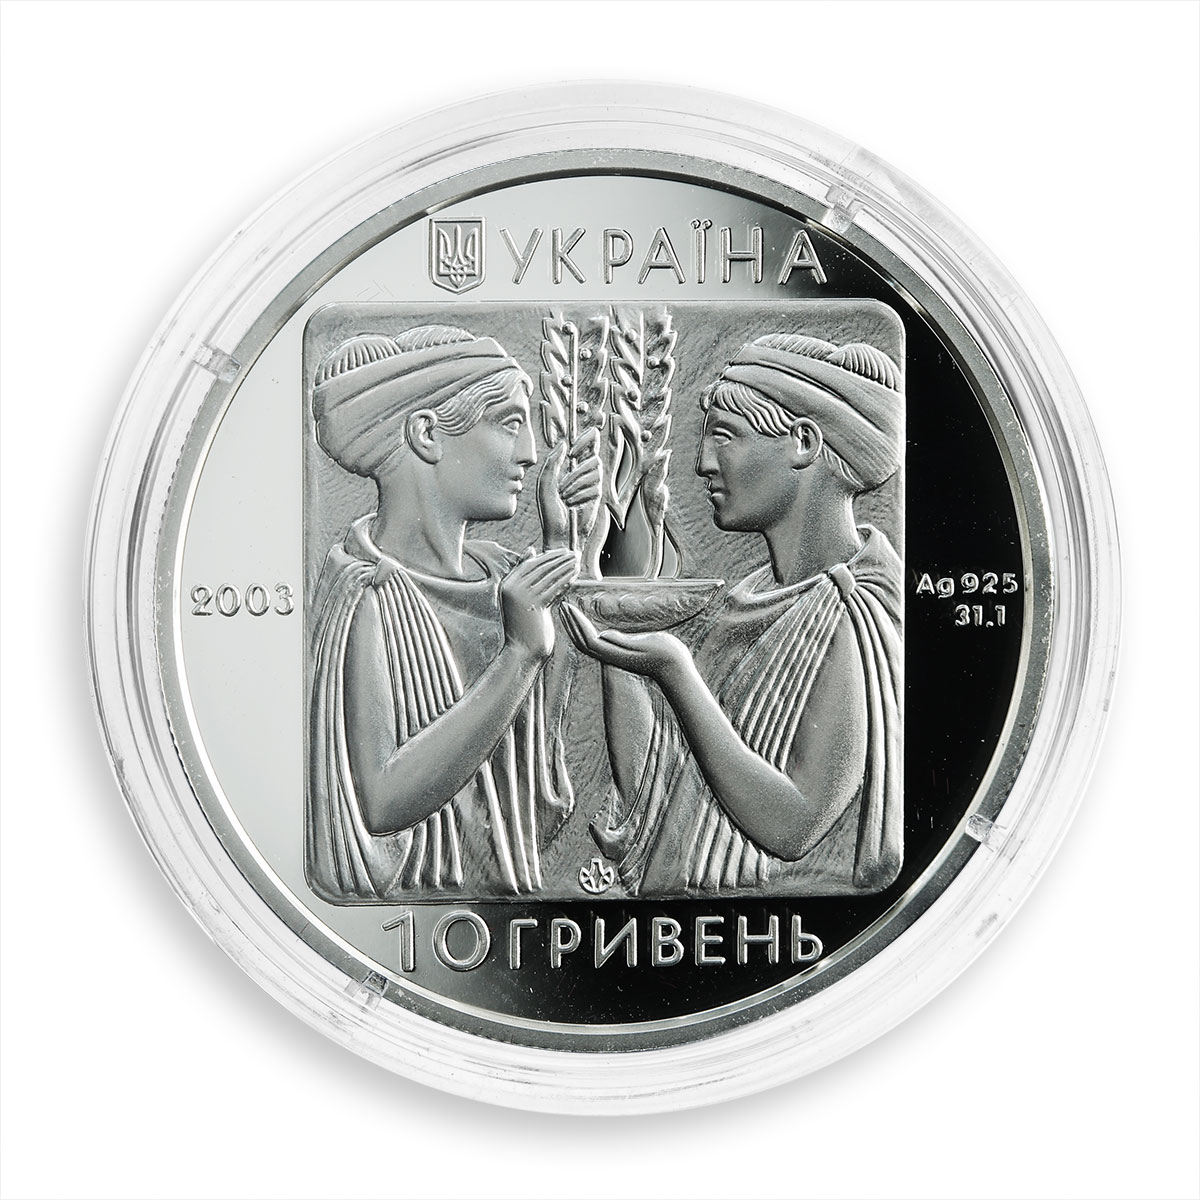 Ukraine 10 hryvnia 28 Summer Olympic Games Athens Boxing silver coin 2003